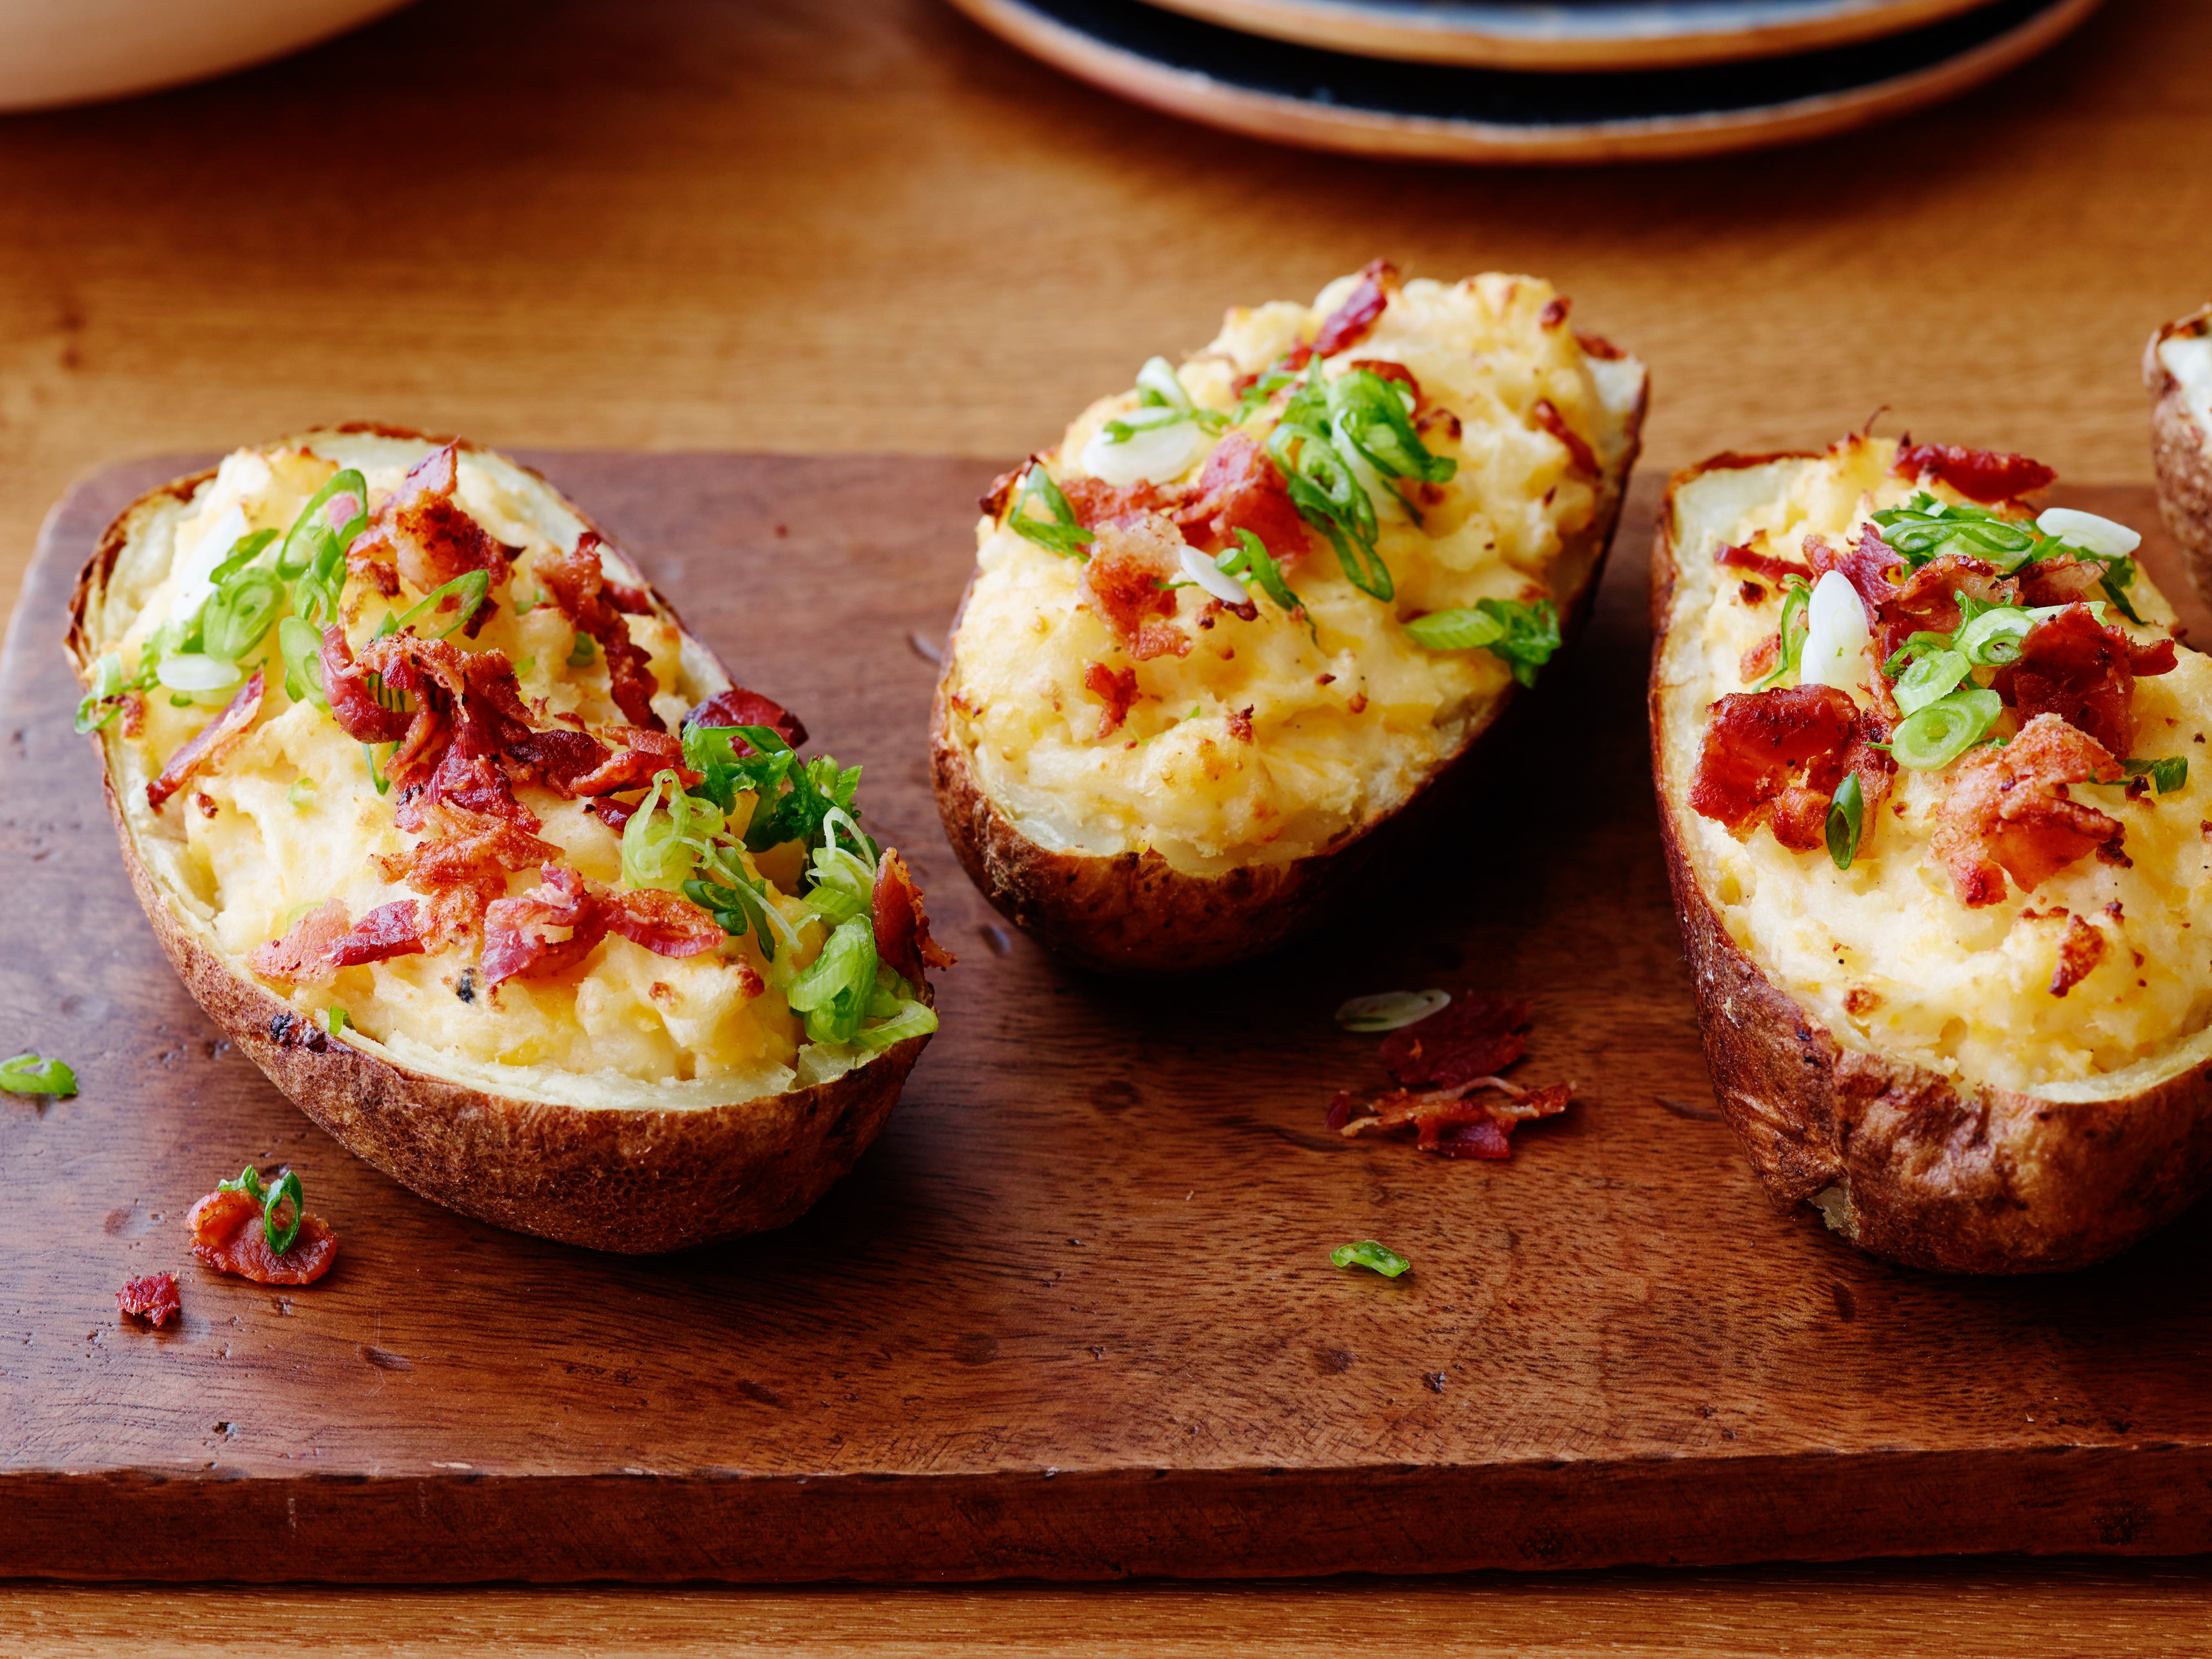 https://www.foodnetwork.com/content/dam/images/food/fullset/2013/6/13/0/YW0301H_twice-baked-potatoes-recipe_s4x3.jpg